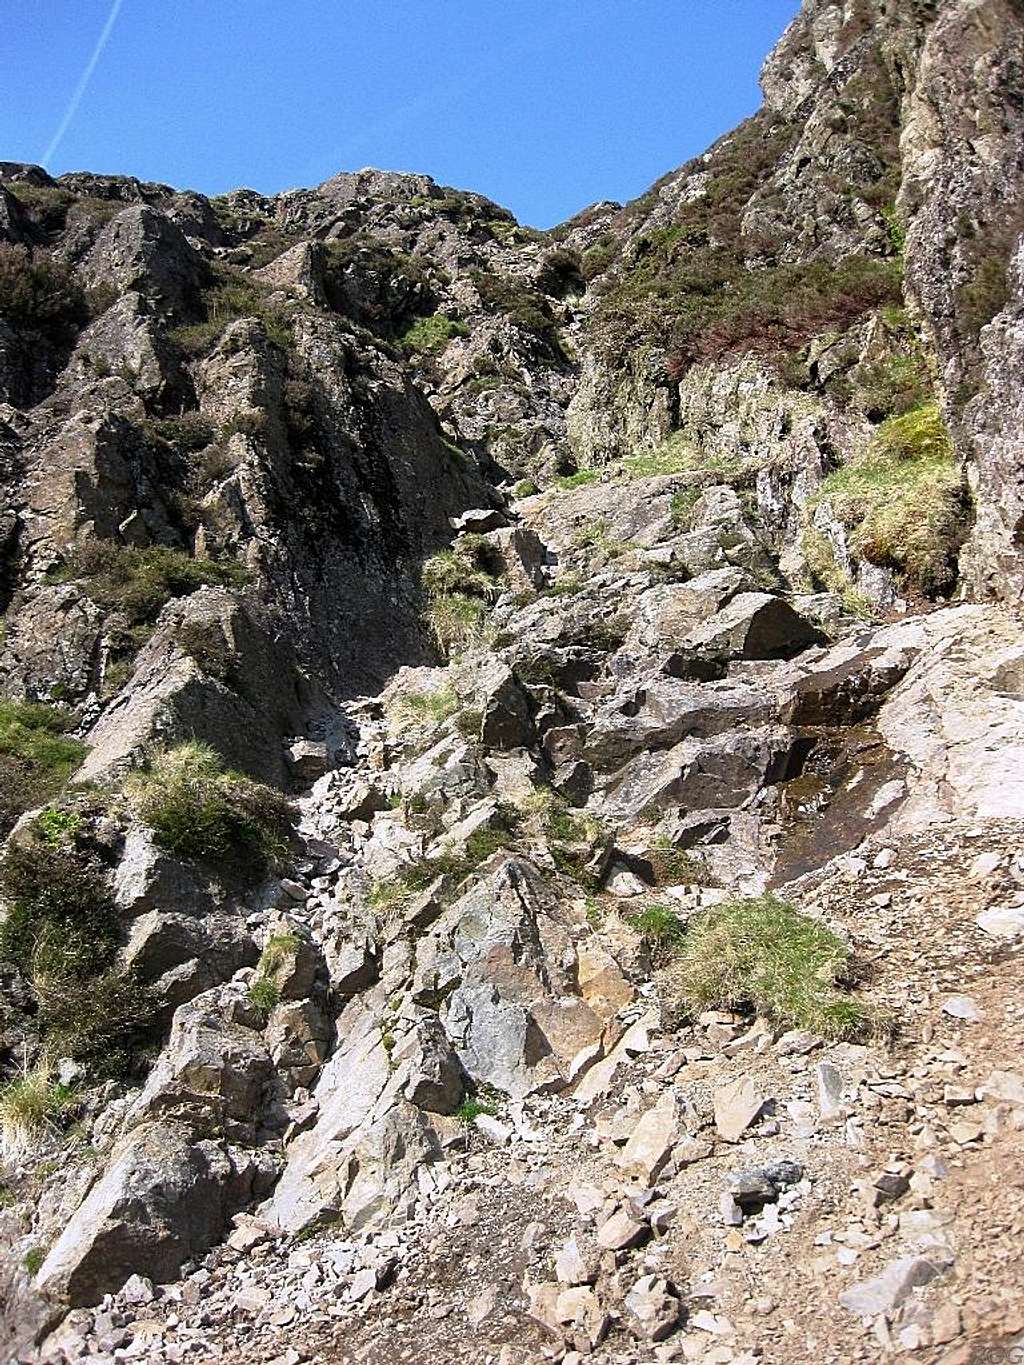 Scrambling section on the southern route to Yewbarrow